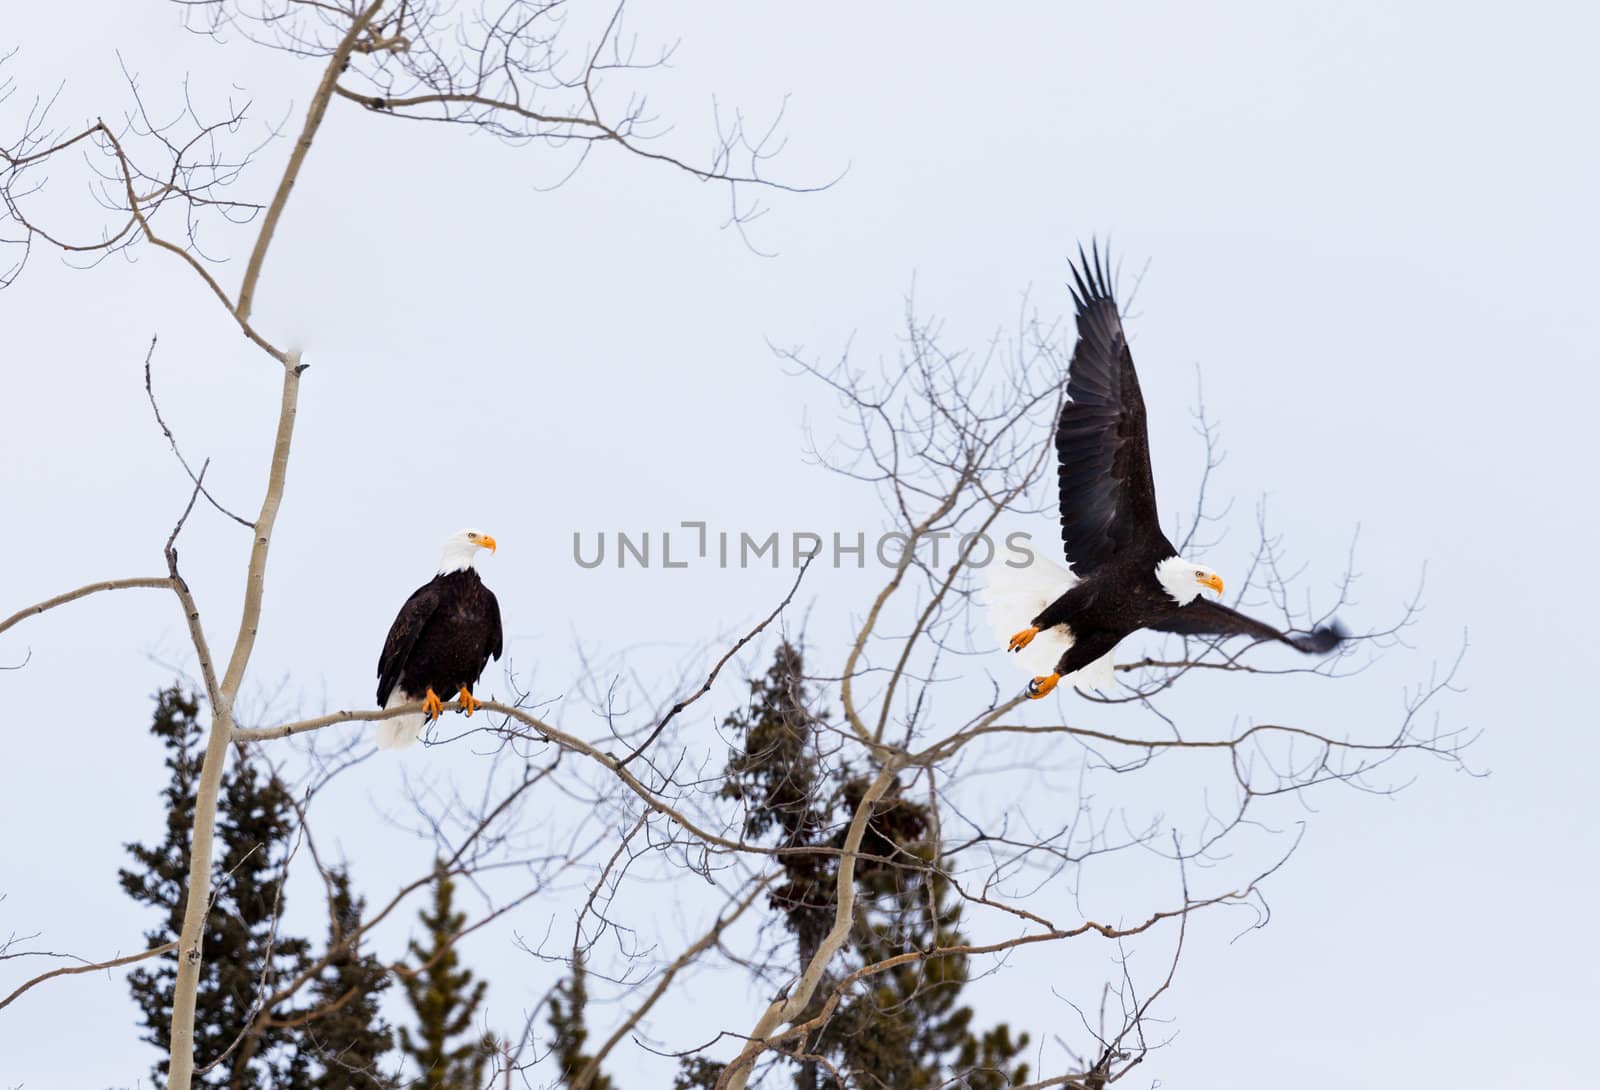 Two adult American Bald Eagles Haliaeetus leucocephalus one eagle still perched in aspen tree-top while the other bird starts flying